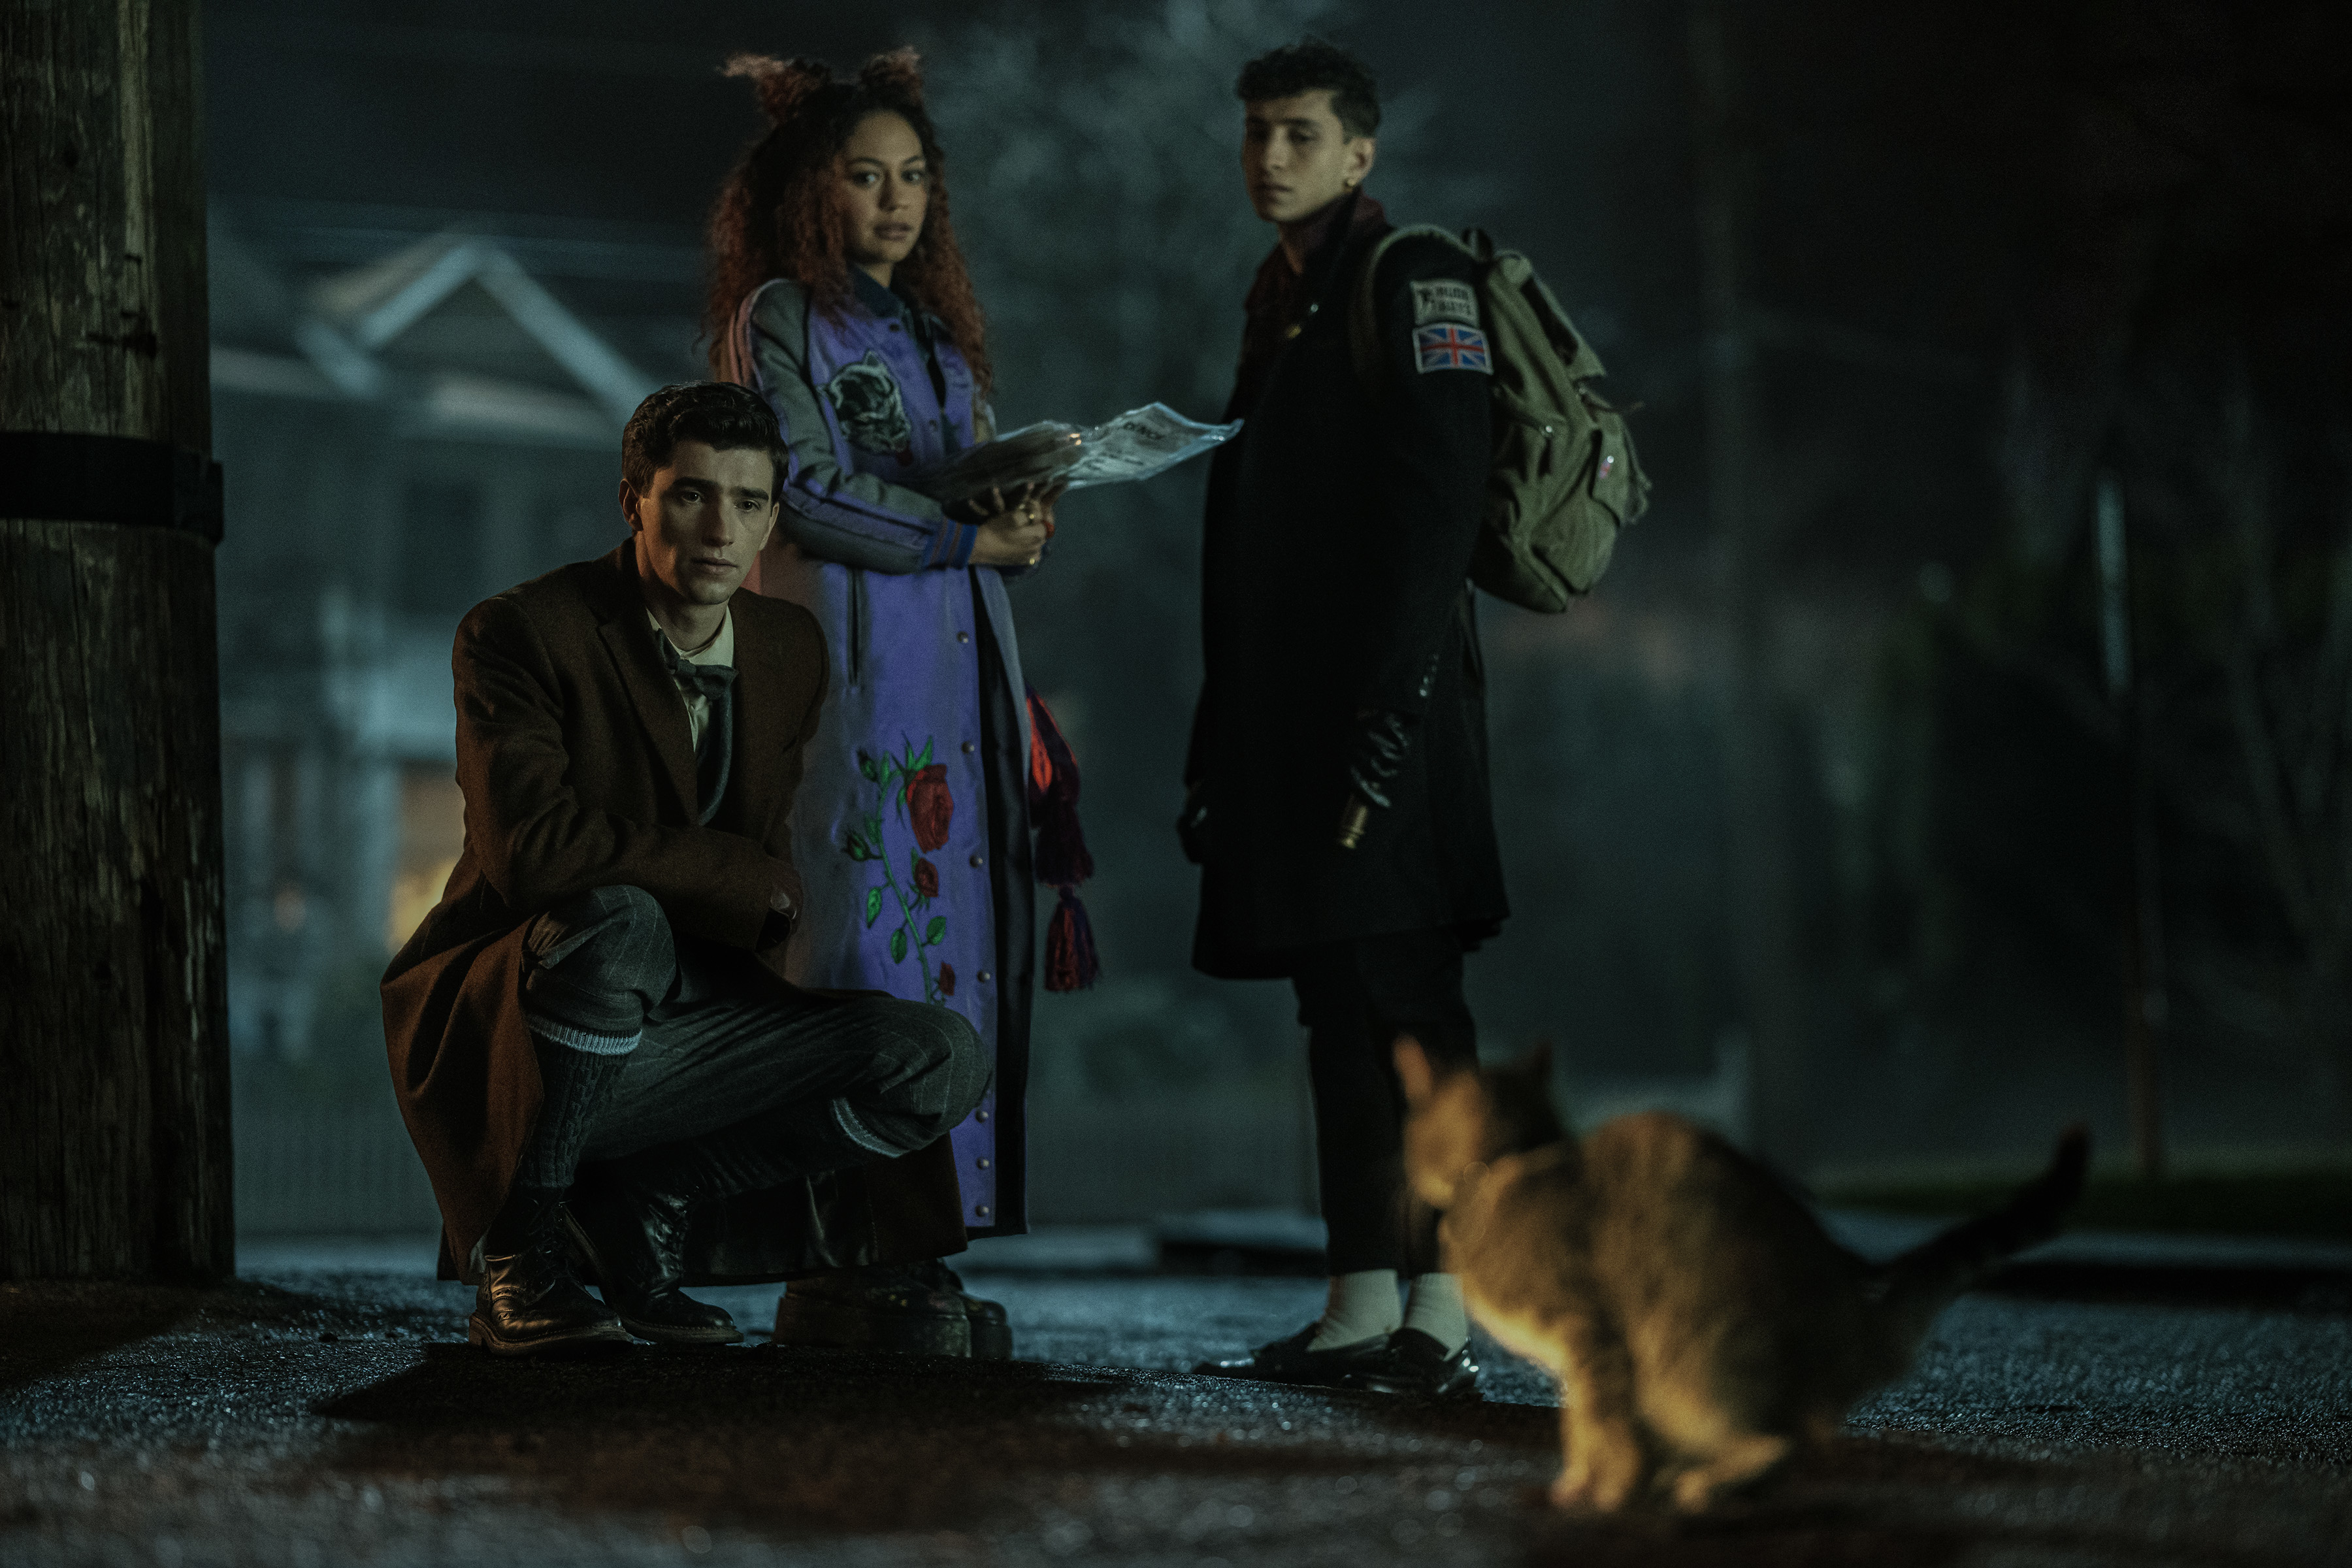 Three individuals, likely actors, in a dimly lit outdoor scene, with one crouching, two standing, and a cat in the foreground. They appear curious or tense